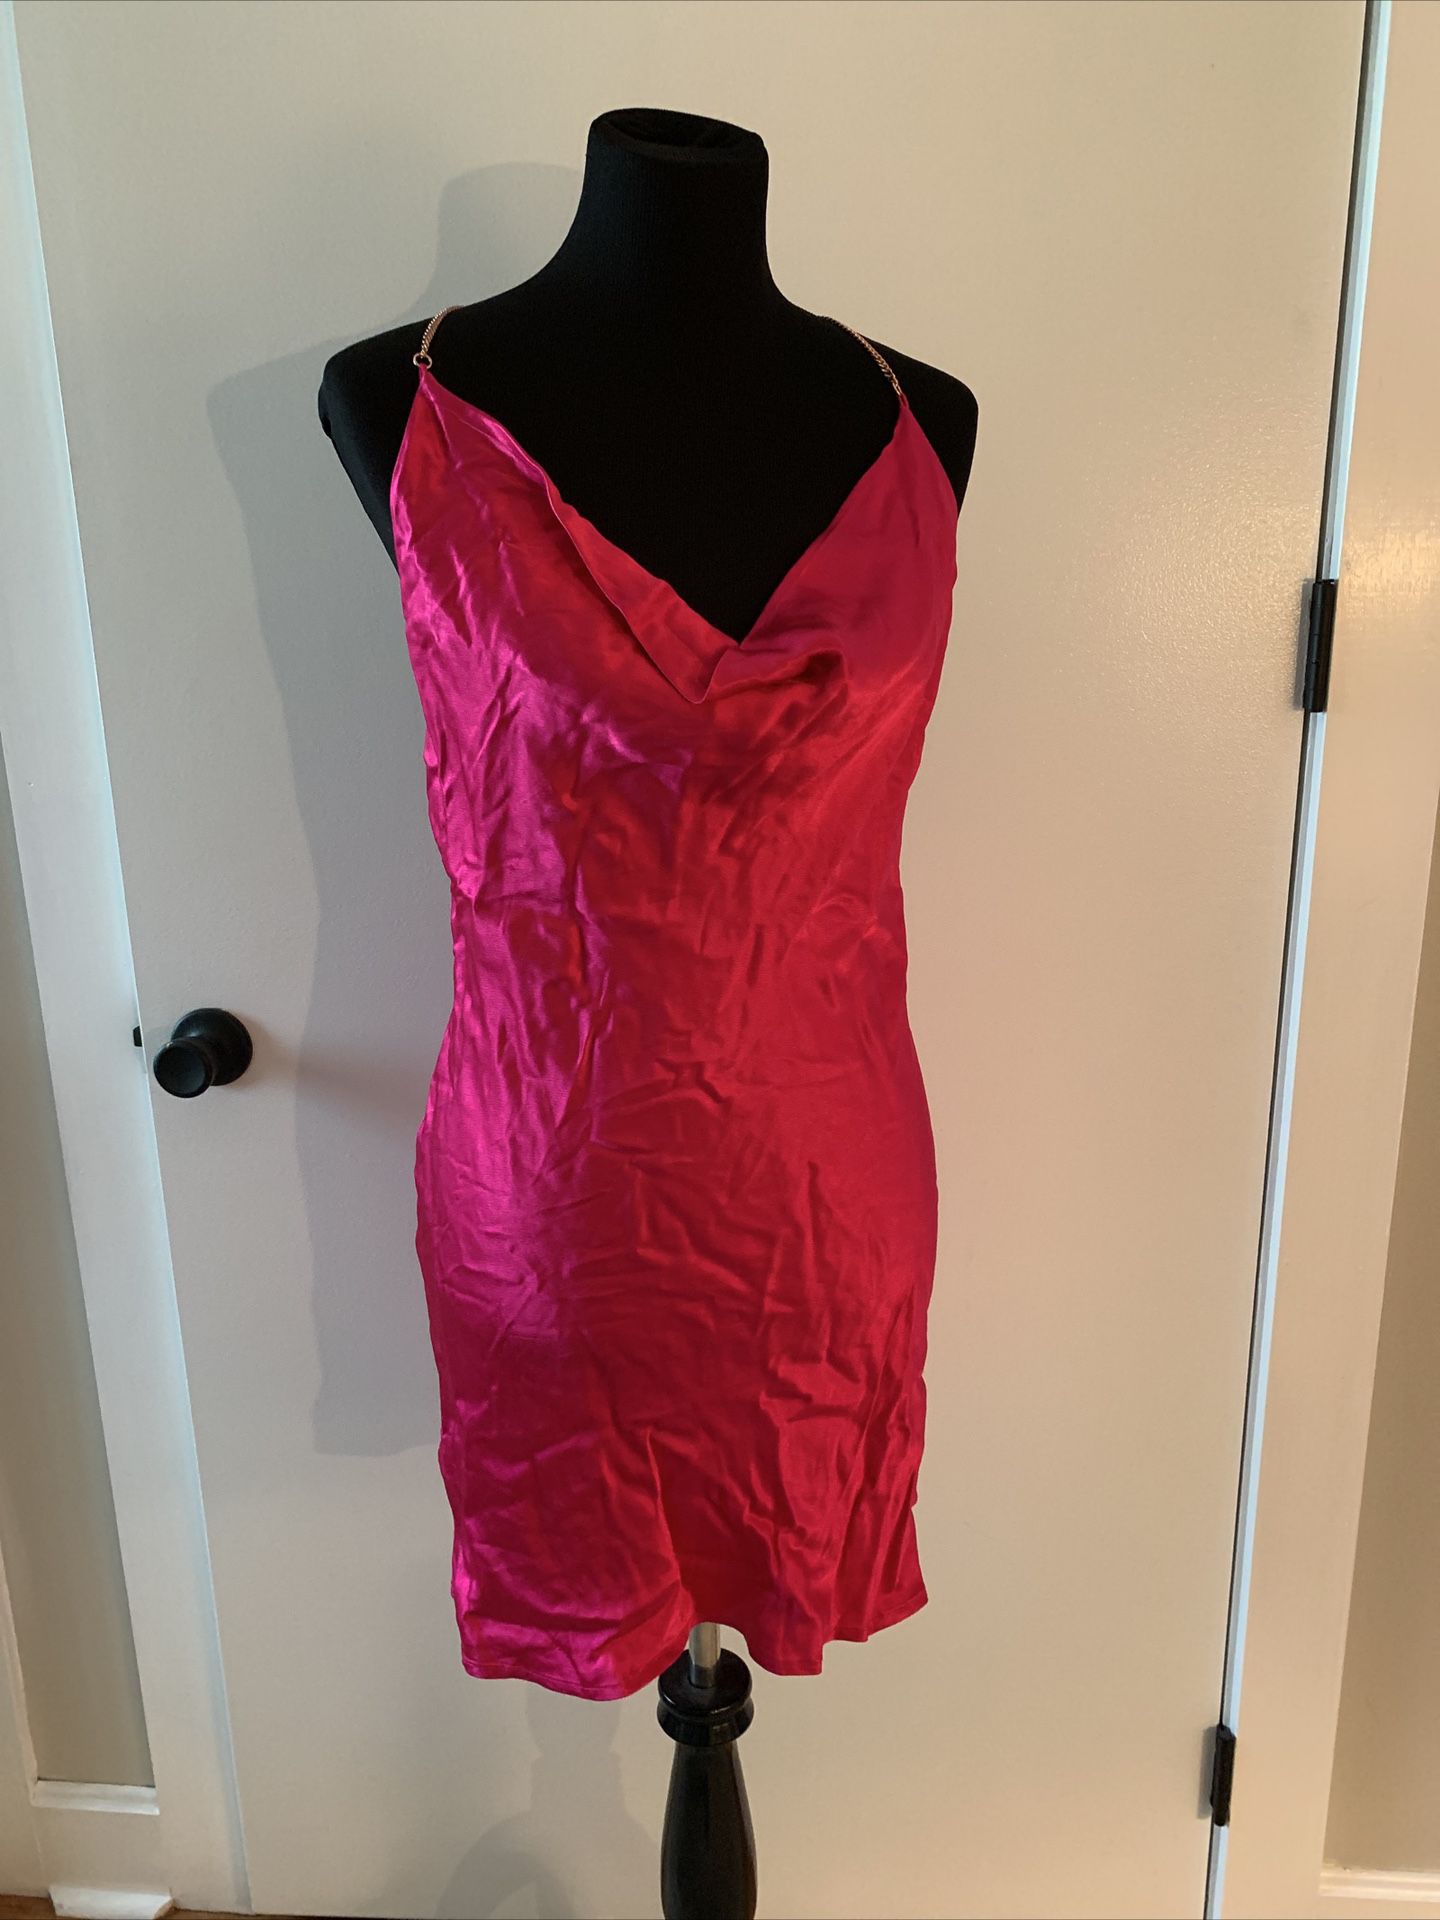 Forever 21 Womens Juniors Dress Hot Pink W Gold Chain Straps Size Med NWT